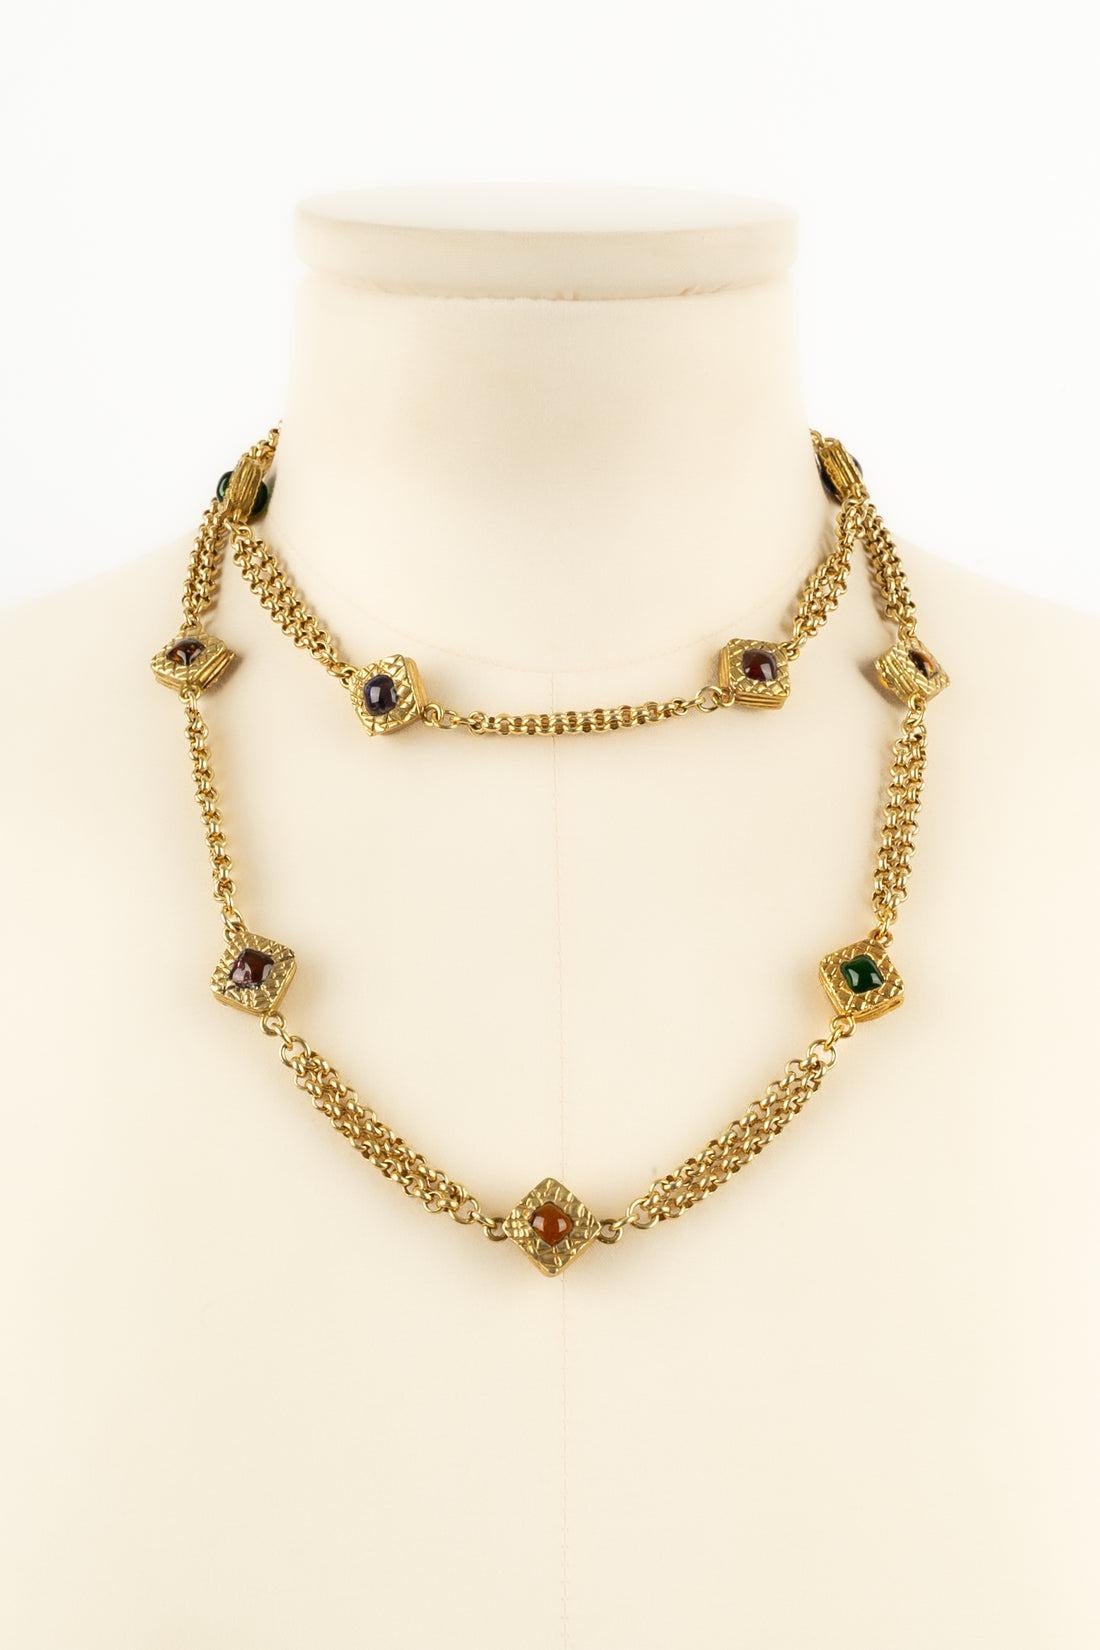 Women's Chanel Chain Necklace, 1990s For Sale